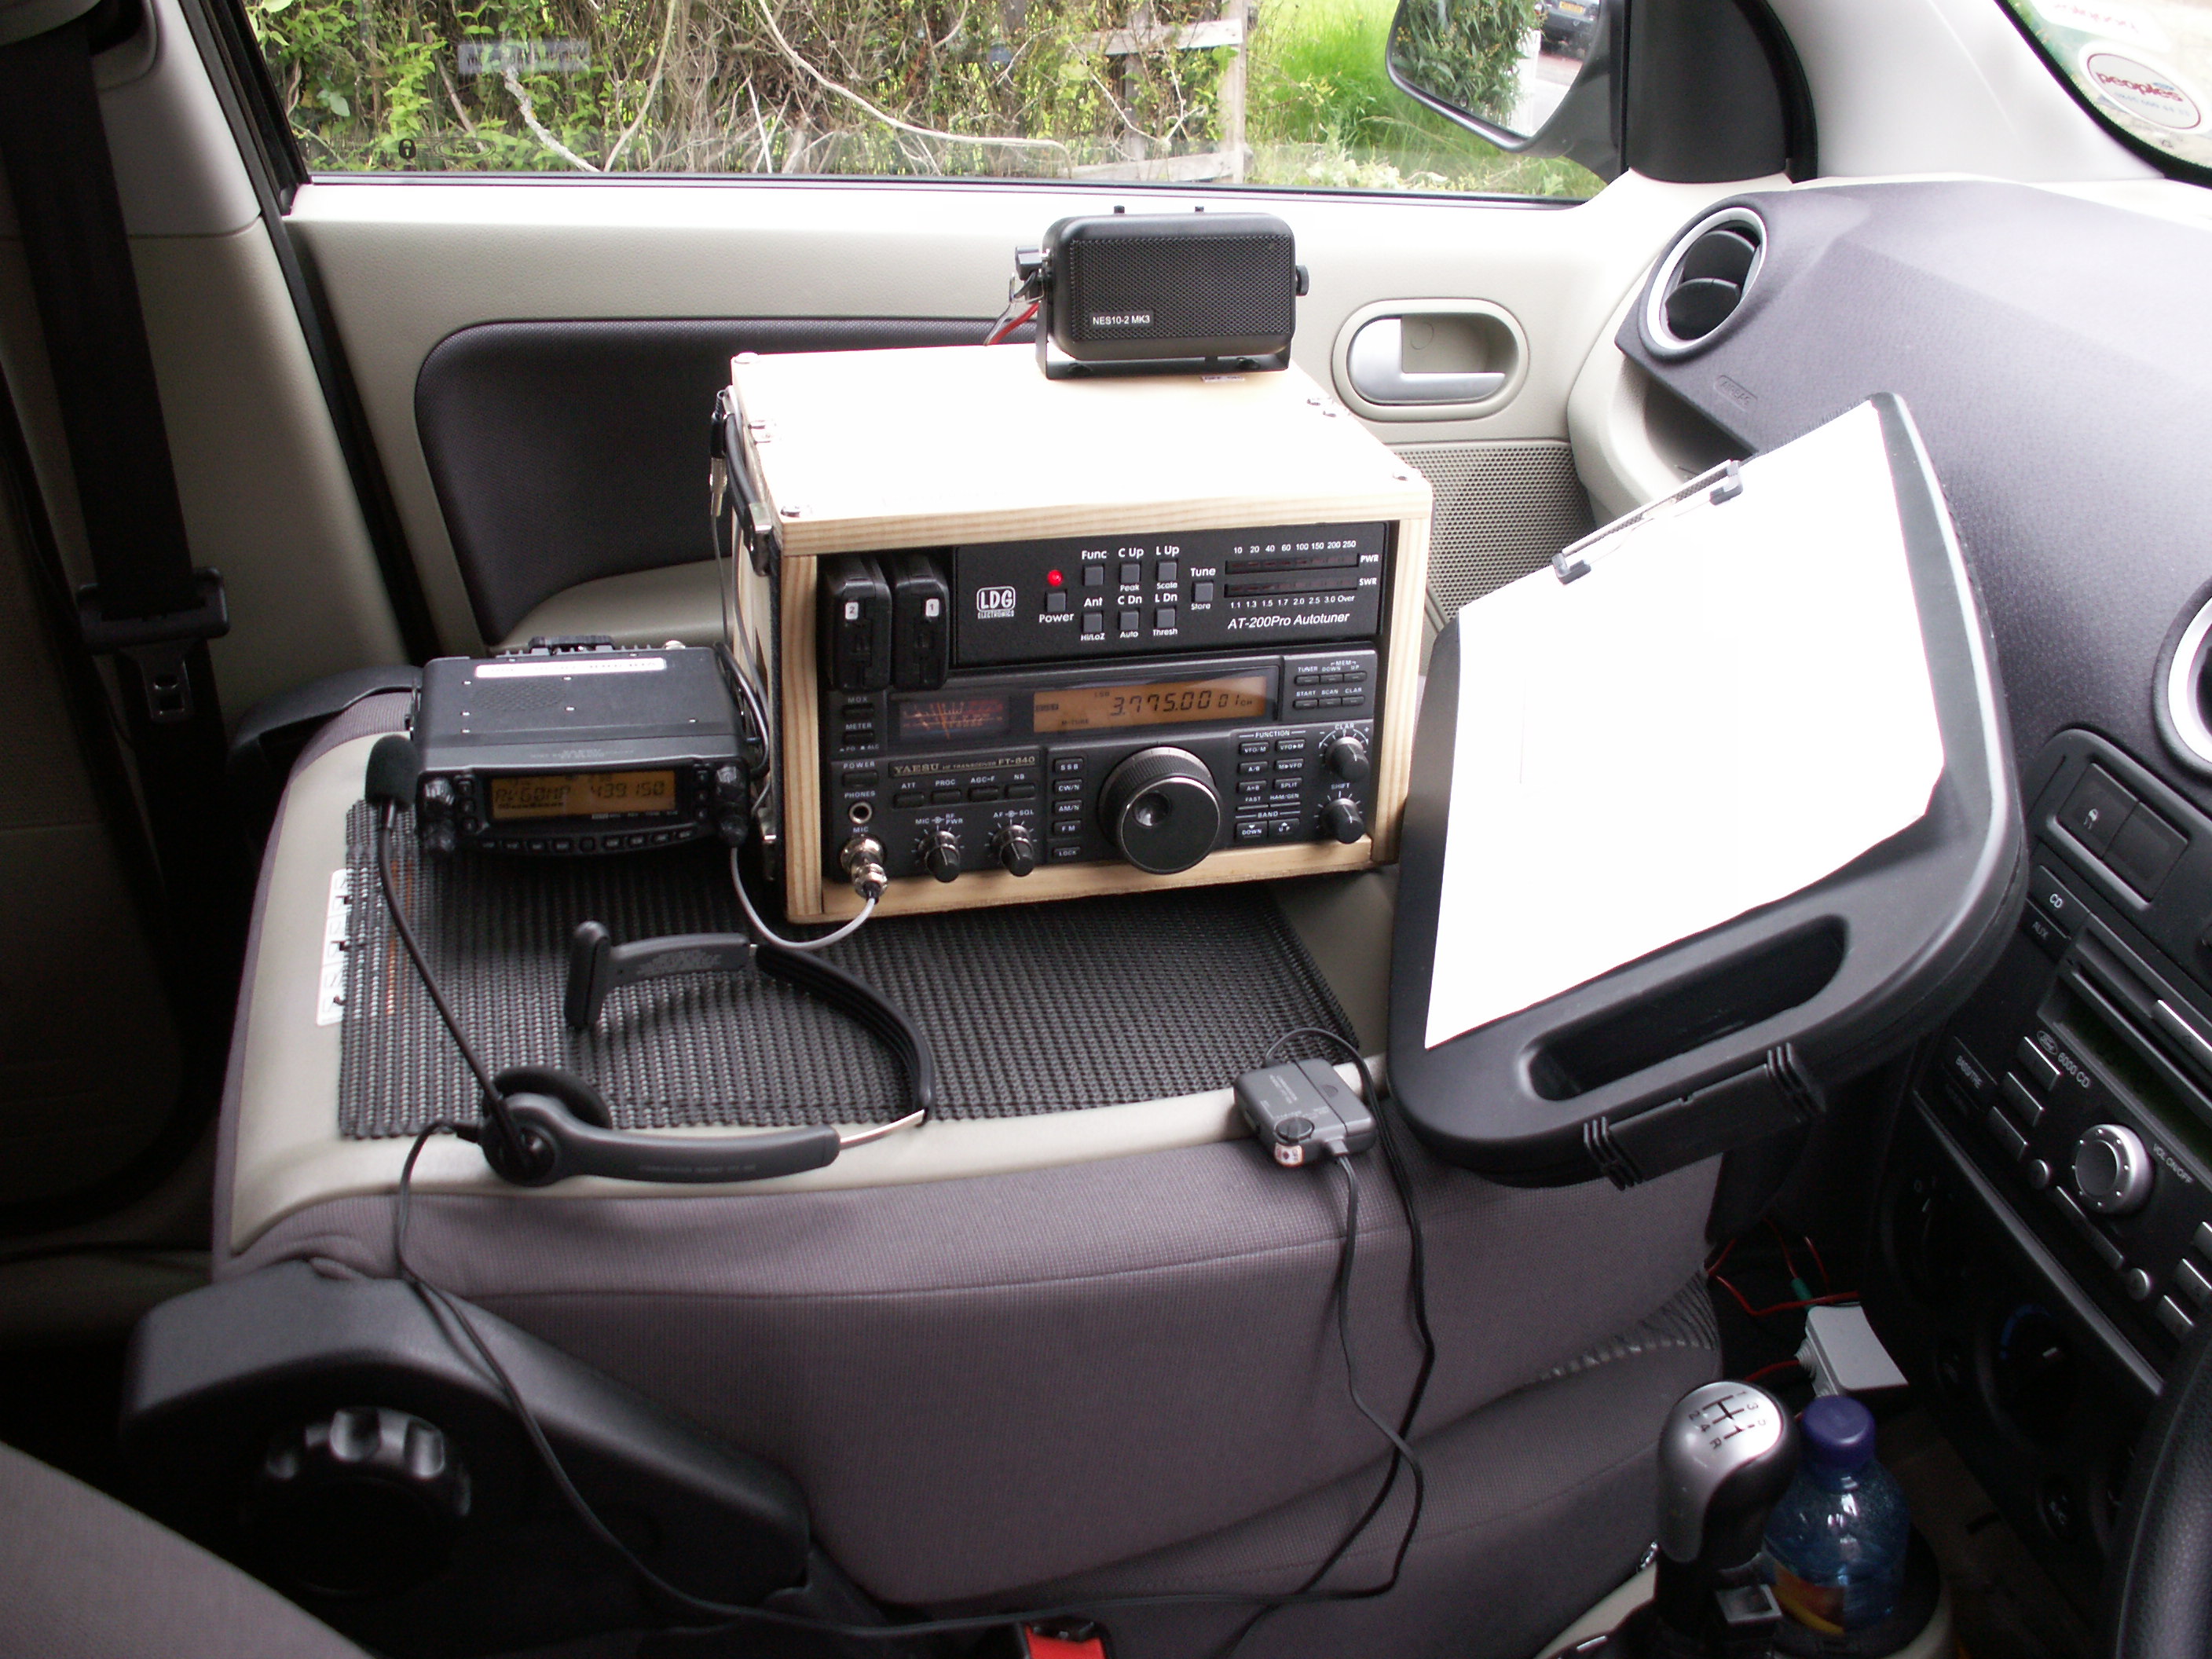 VHF/UHF and HF rigs on passenger seat of car